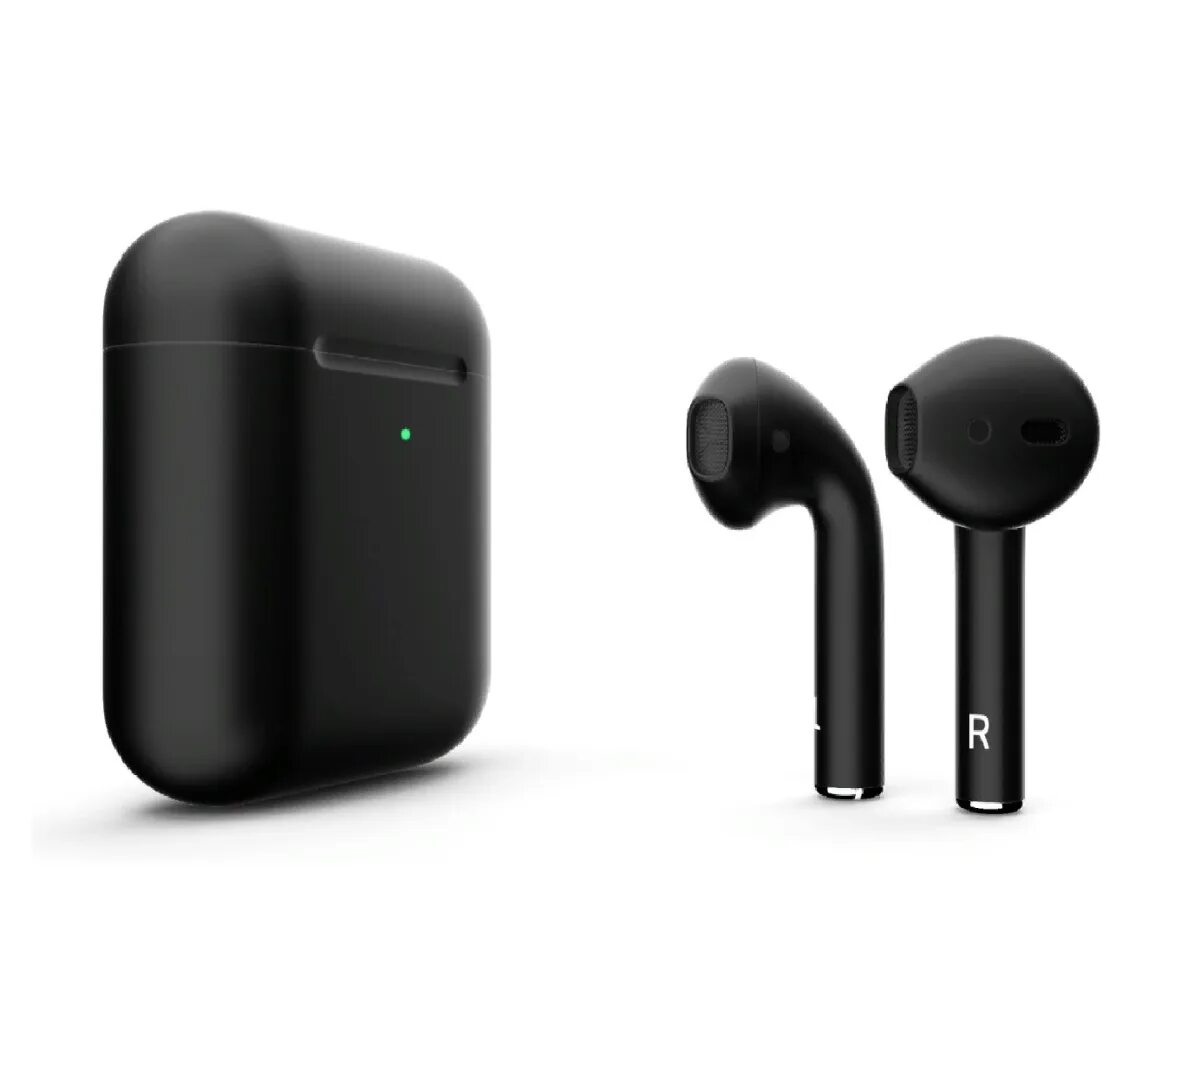 Airpods honor. Apple AIRPODS 2. Наушники беспроводные Apple AIRPODS. Беспроводные наушники Apple AIRPODS Pro 2. Наушники TWS Apple AIRPODS Pro.